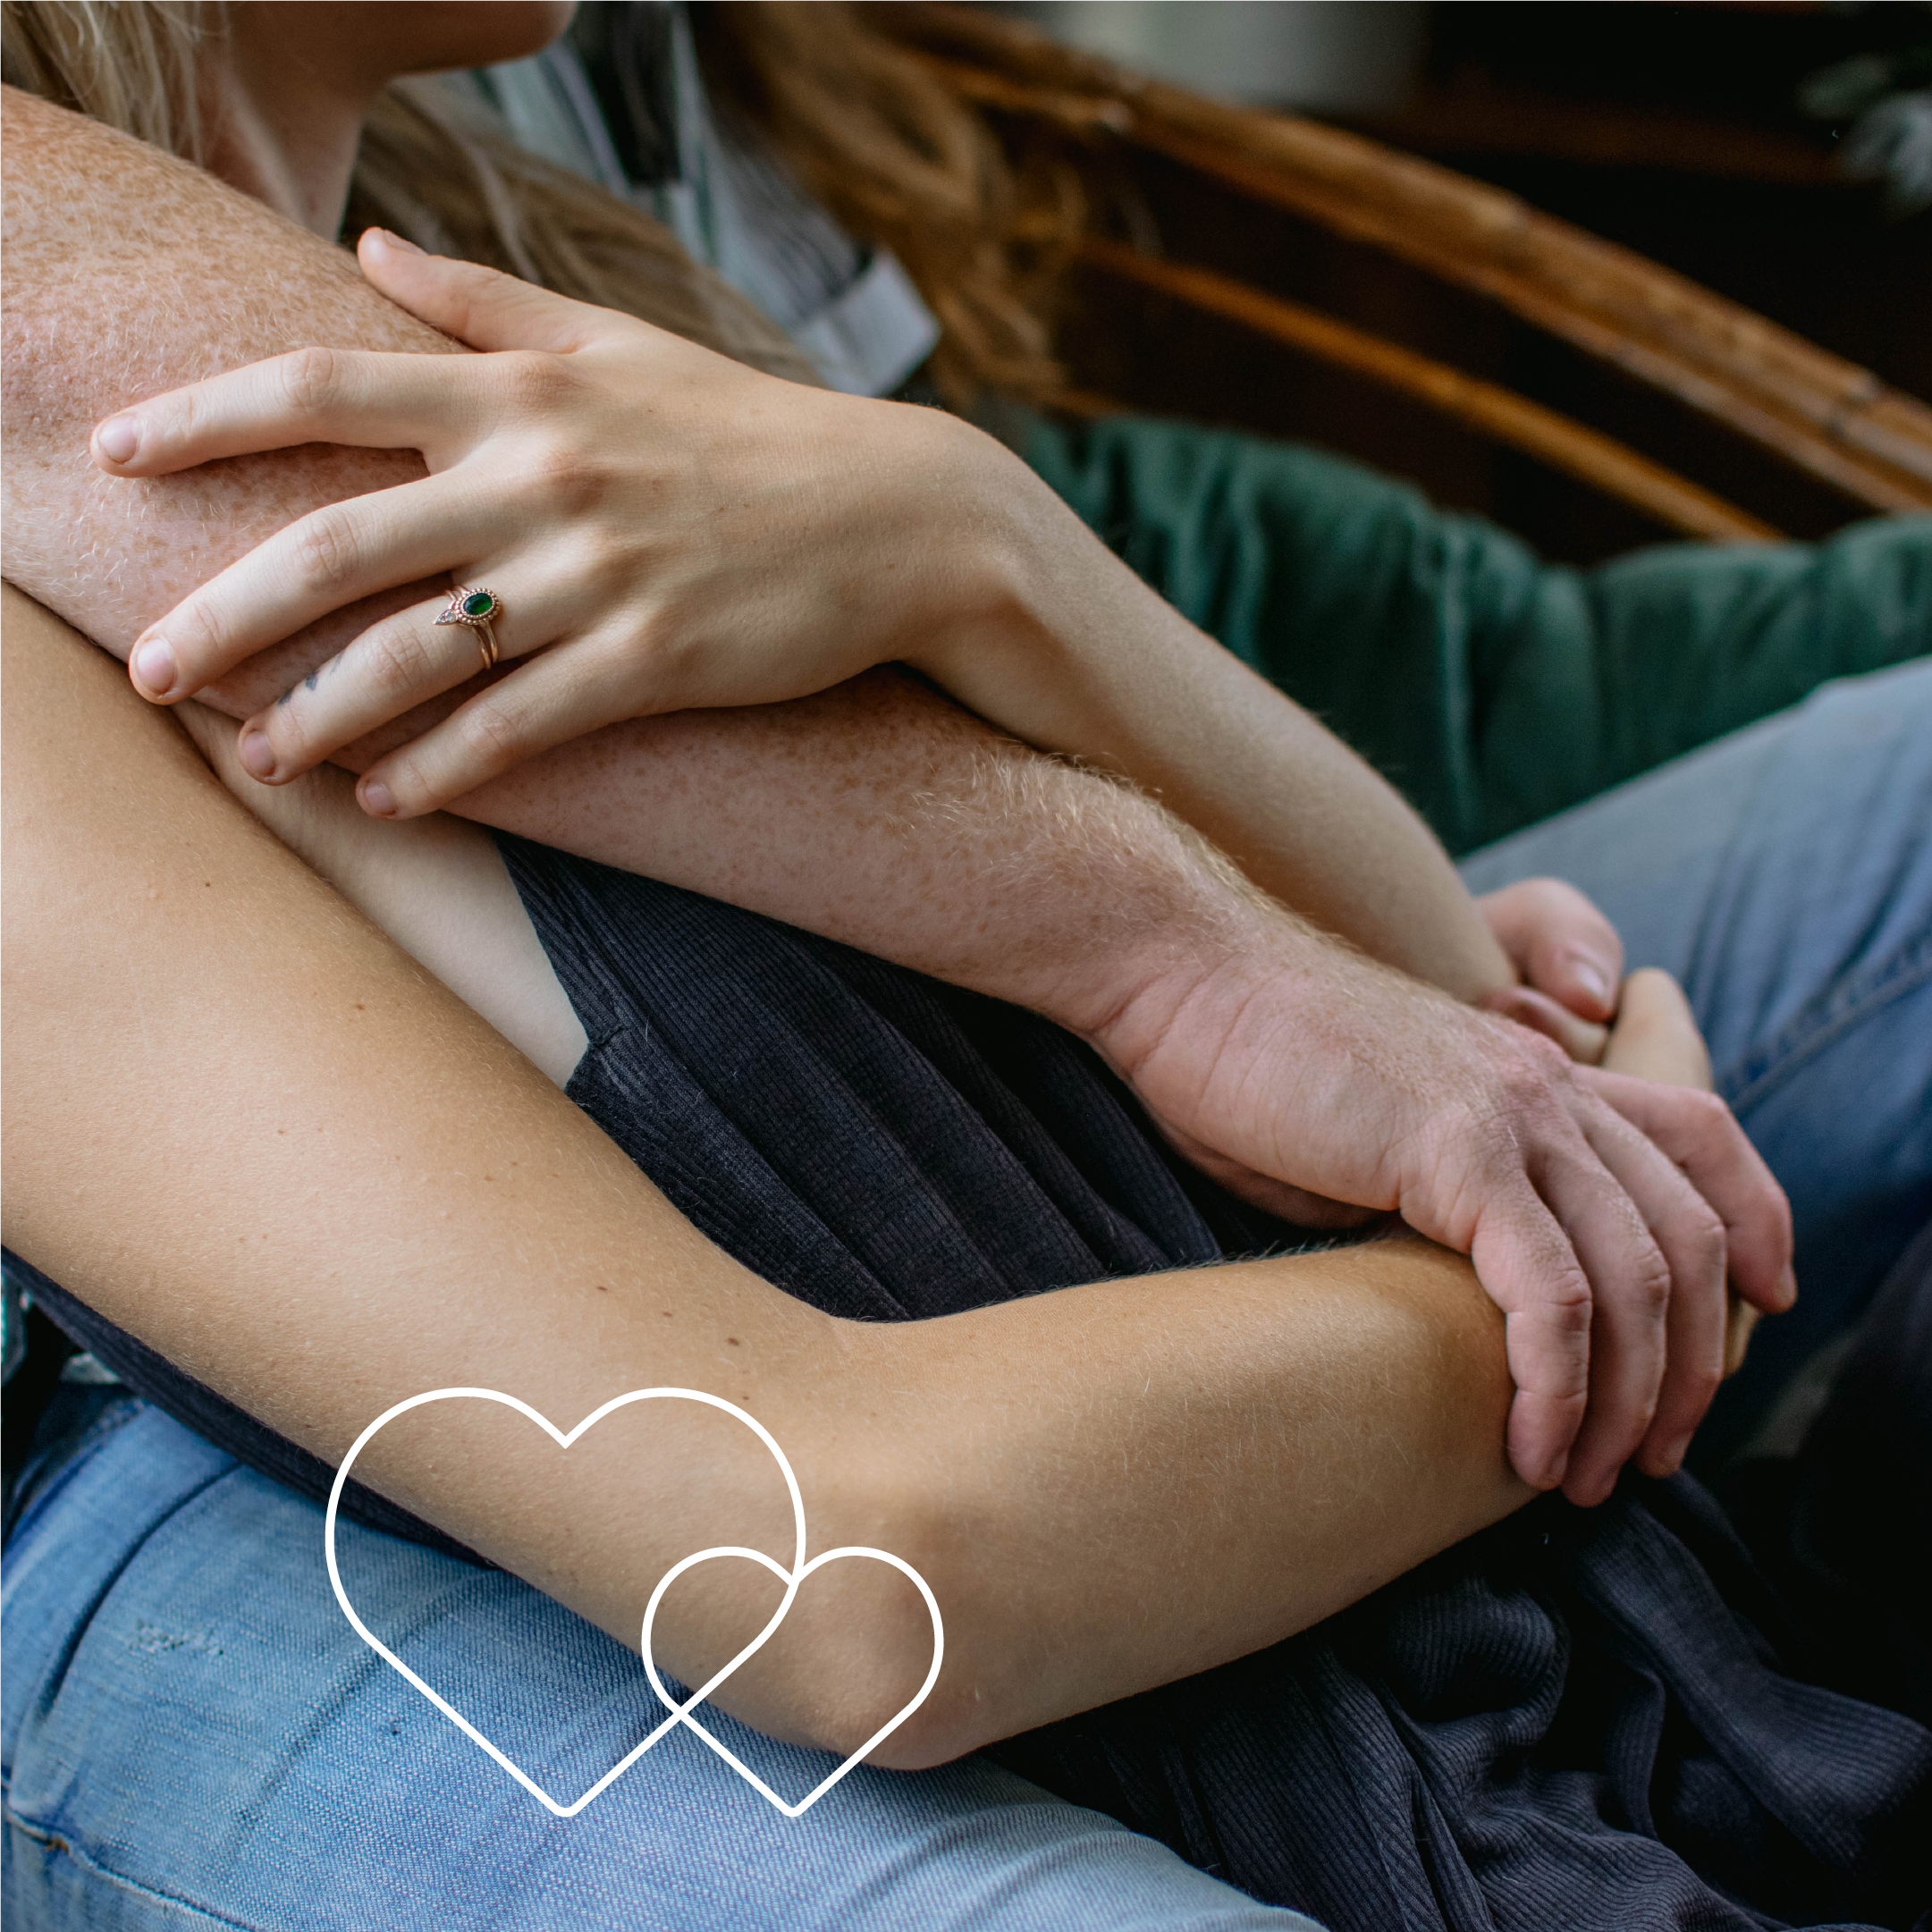 Image of arms intertwined while two people cuddle